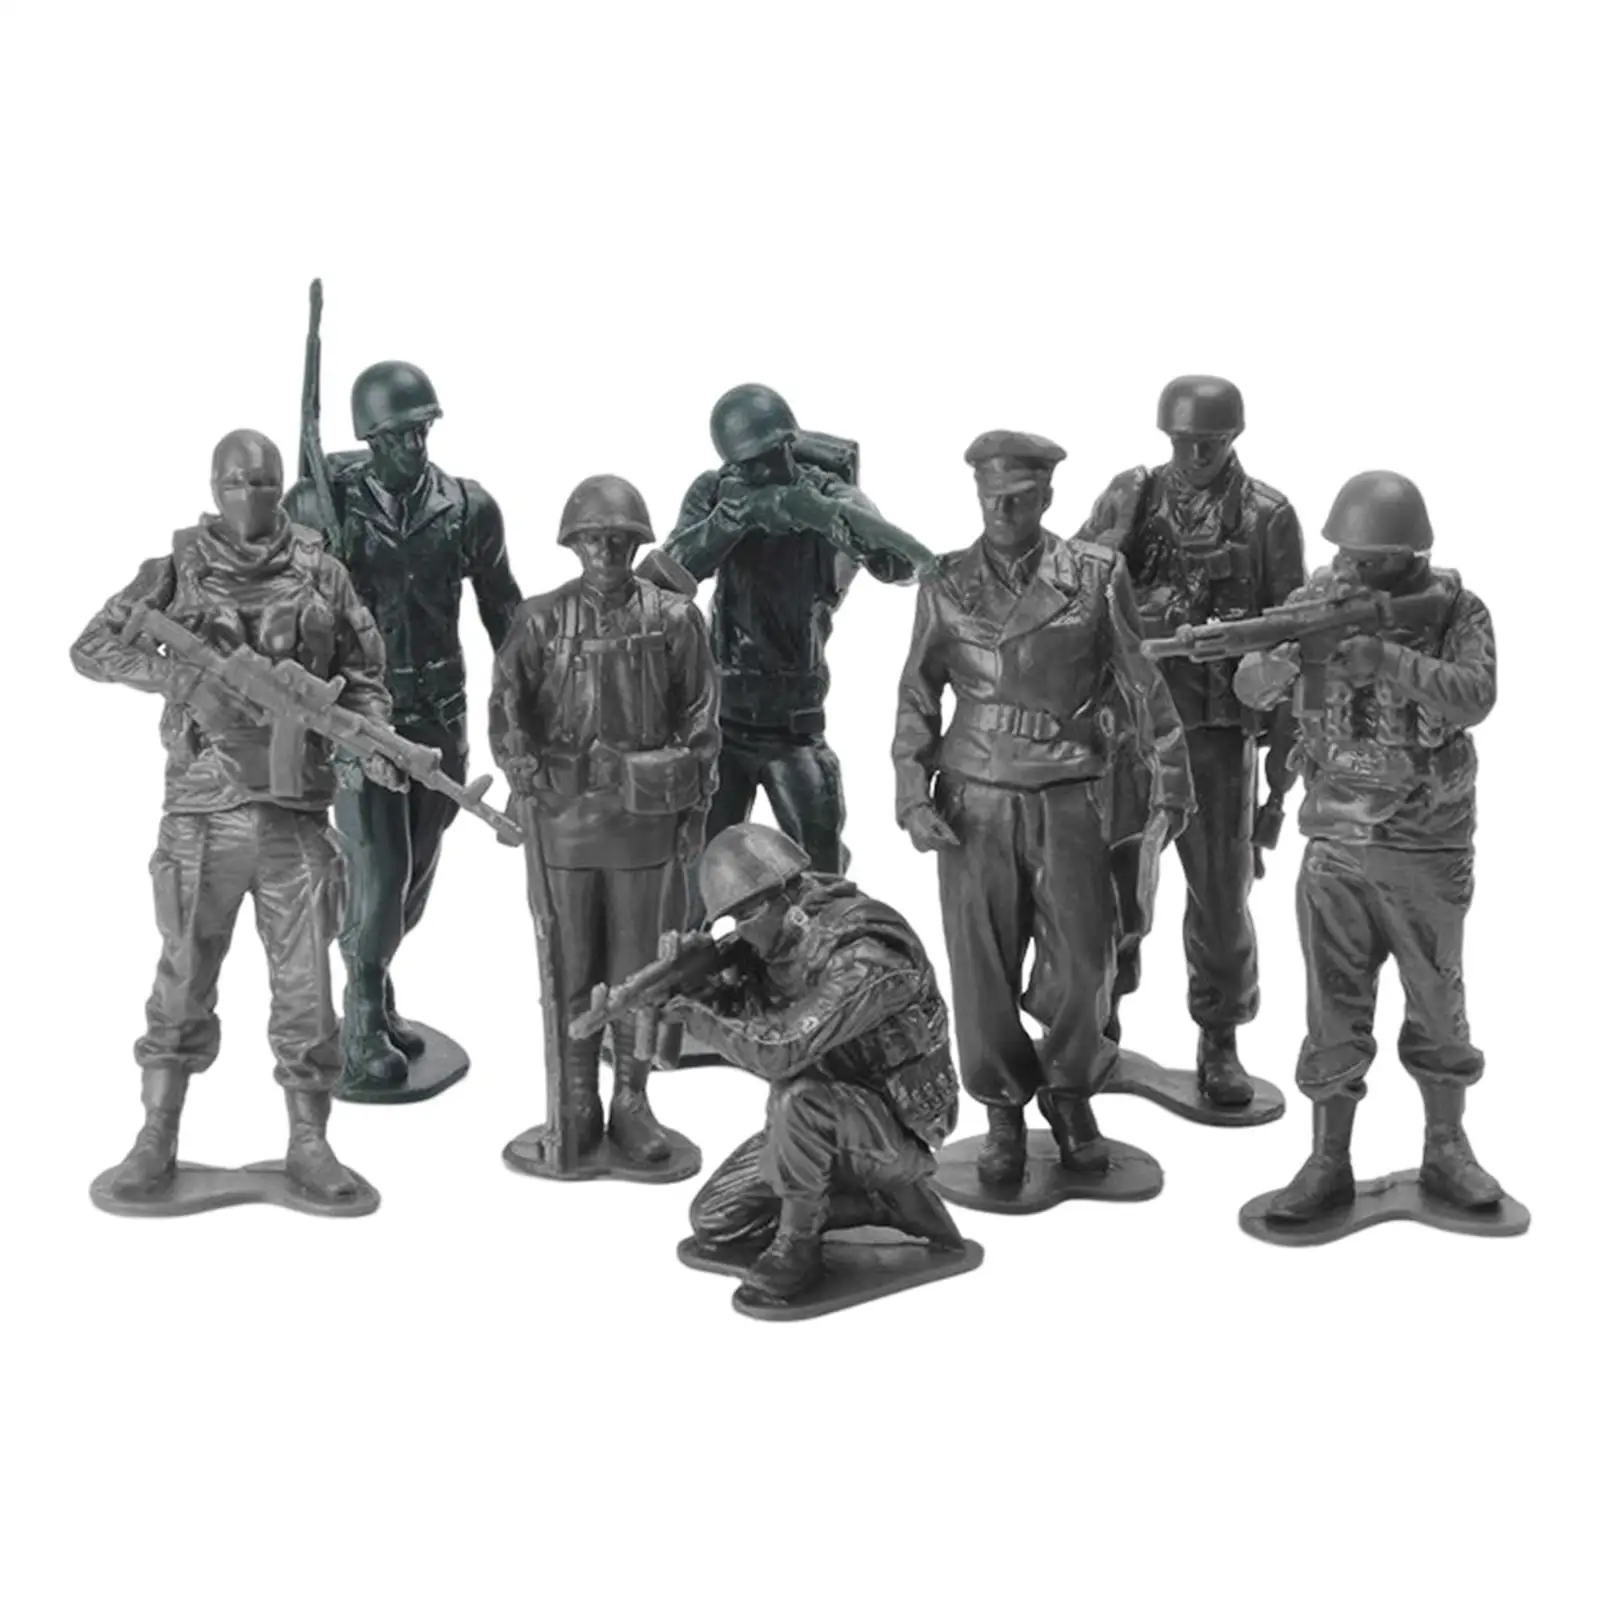 

8 Pieces 1/18 Action Figure Toy Soldiers Playset Realistic Collection Toys Soldiers Figurines Model for Teens Children Kids Boys